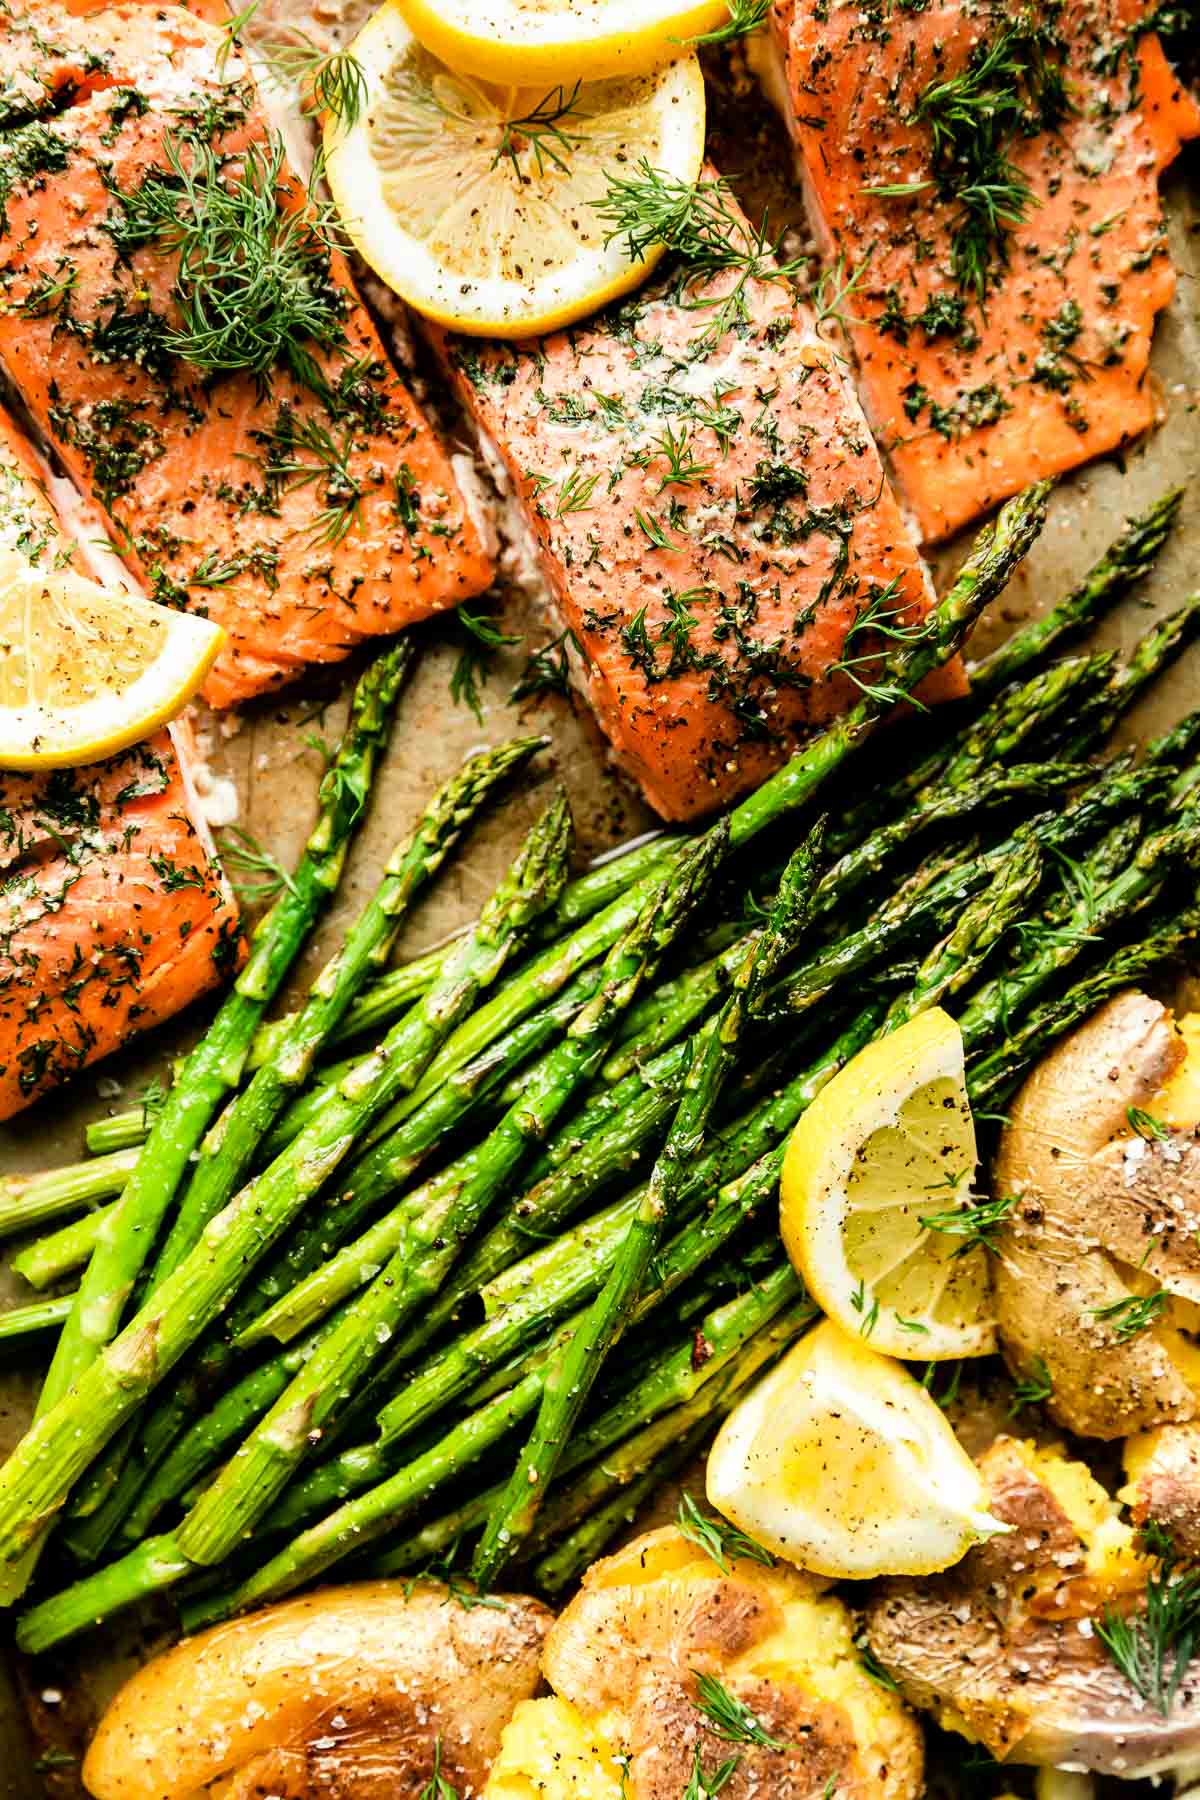 A macro close up shot of baked salmon fillets, asparagus spears, and smashed Yukon gold potatoes arranged on a single sheet pan.